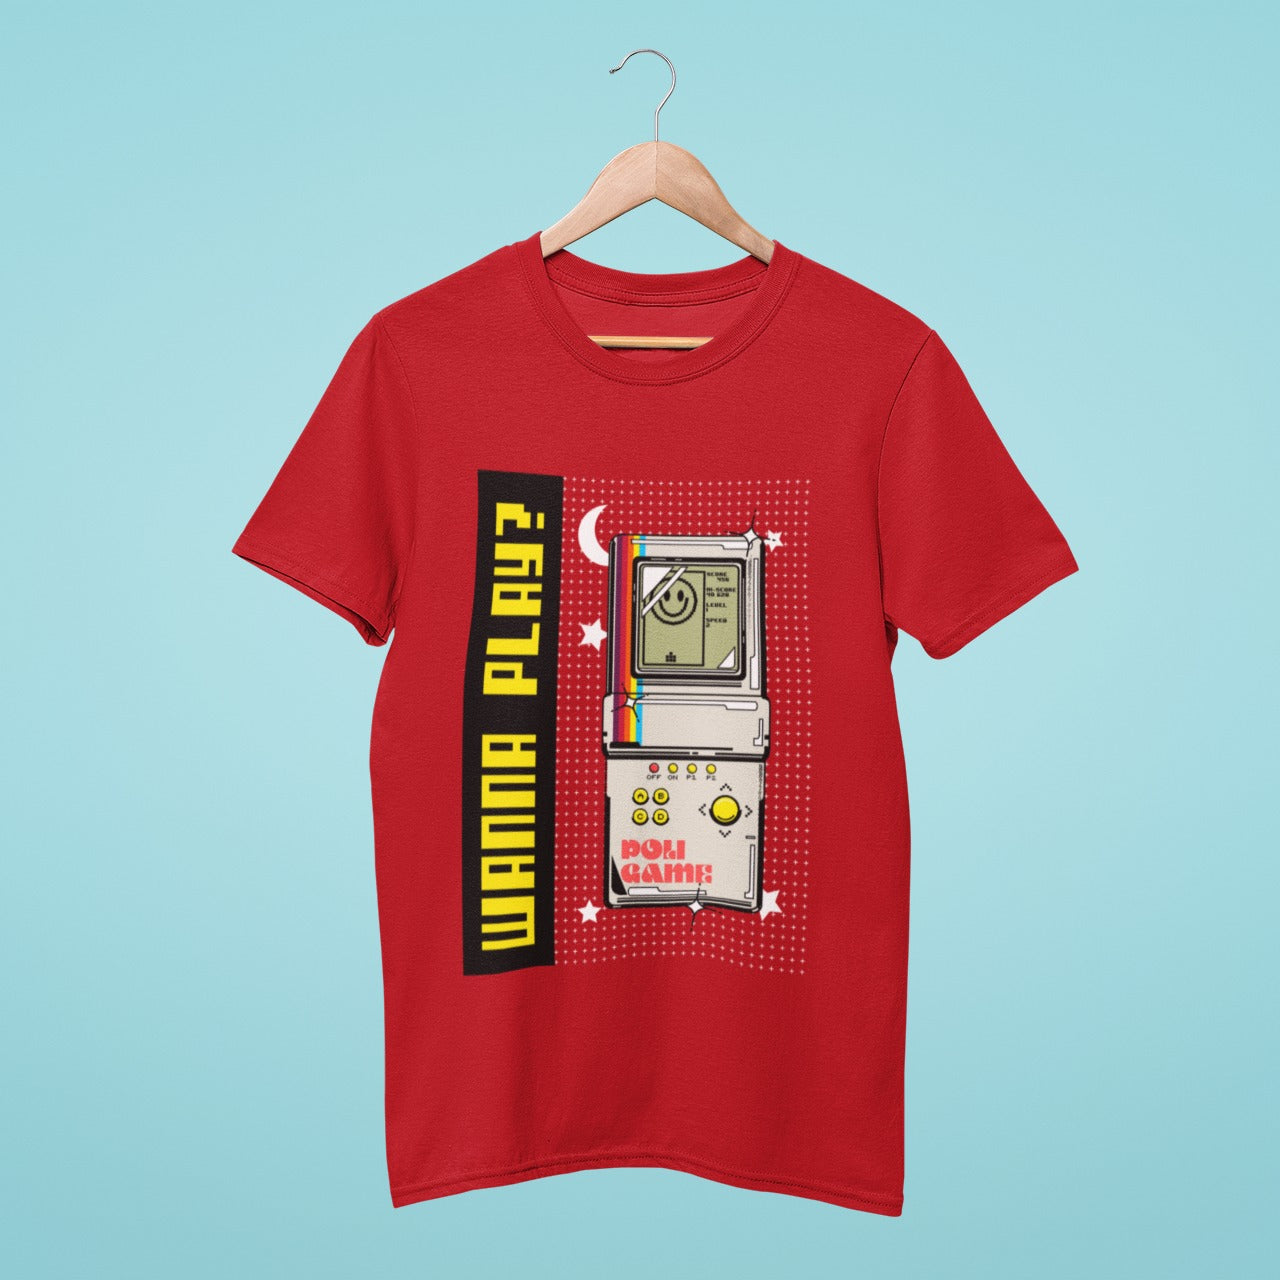 Introducing our red t-shirt with a nostalgic twist! The "Wanna Play?" title paired with a retro handheld LCD game console graphic is perfect for any gamer looking to relive their childhood. Our high-quality fabric ensures comfort while gaming for hours on end. Don't miss out on this playful and stylish addition to your gaming wardrobe!